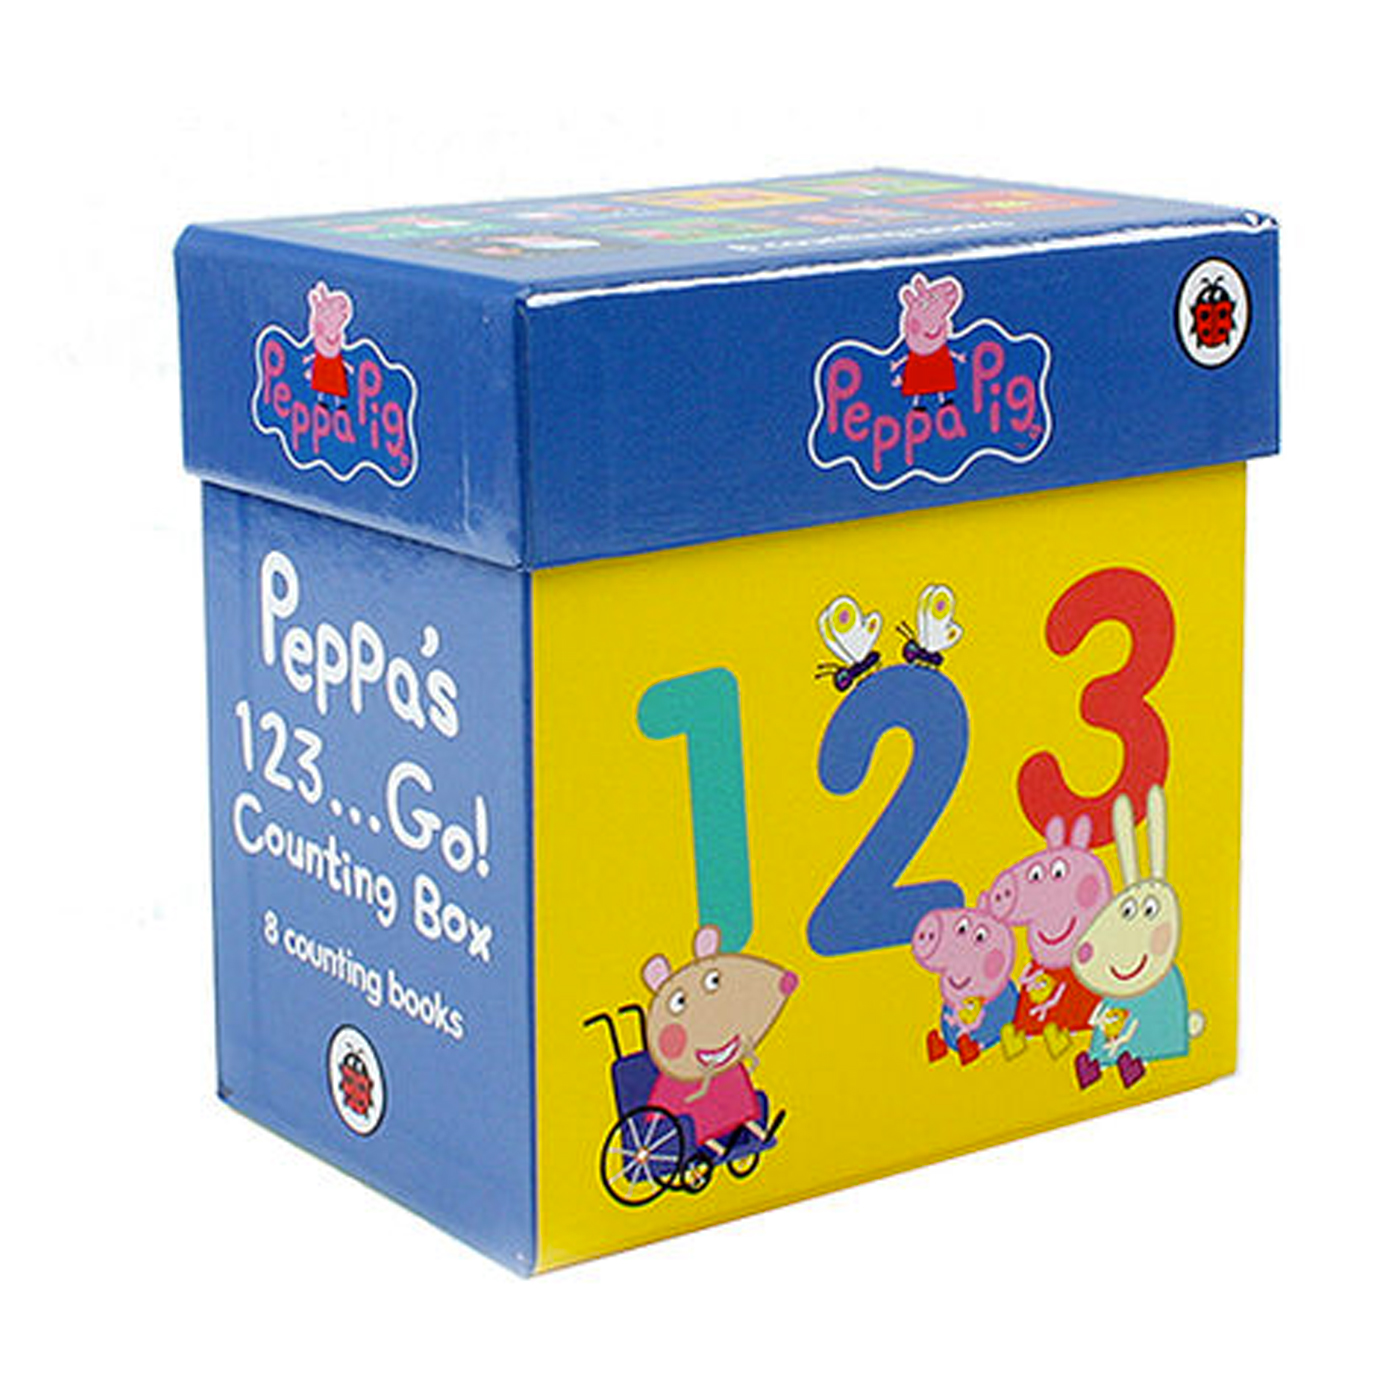  Peppas 123... Go! Counting Box